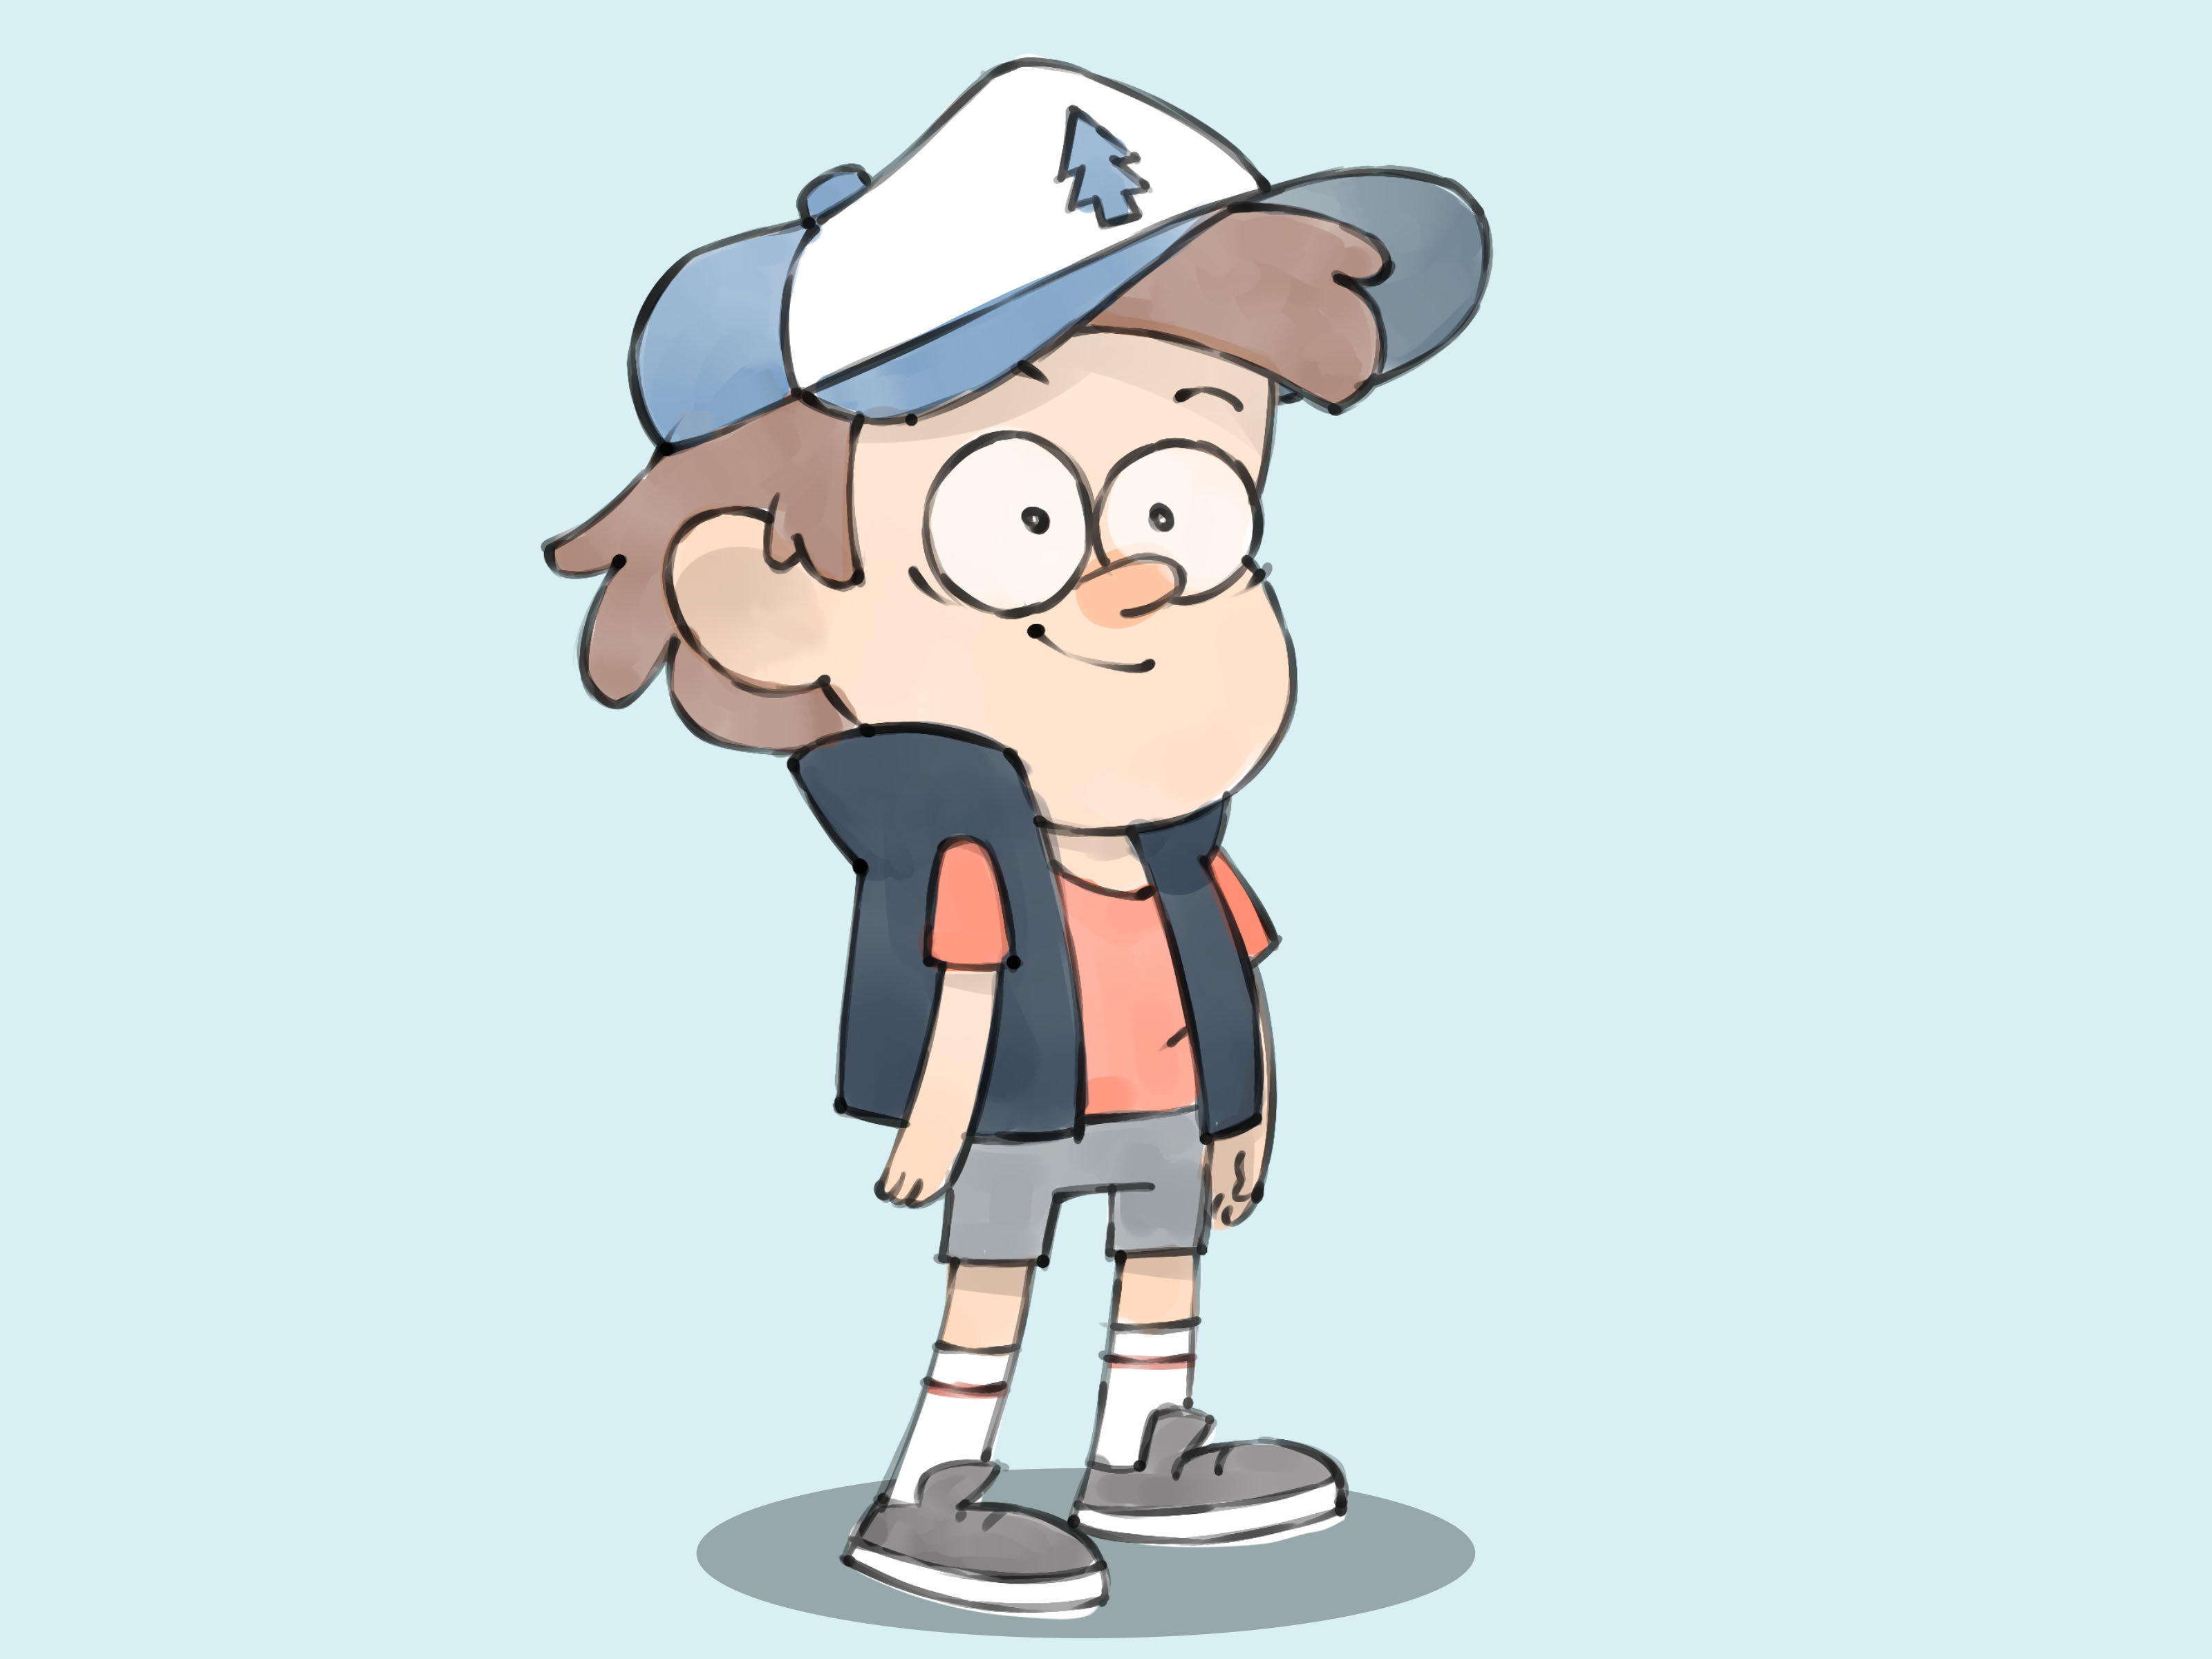 How To Draw Dipper Pines From Gravity Falls Steps